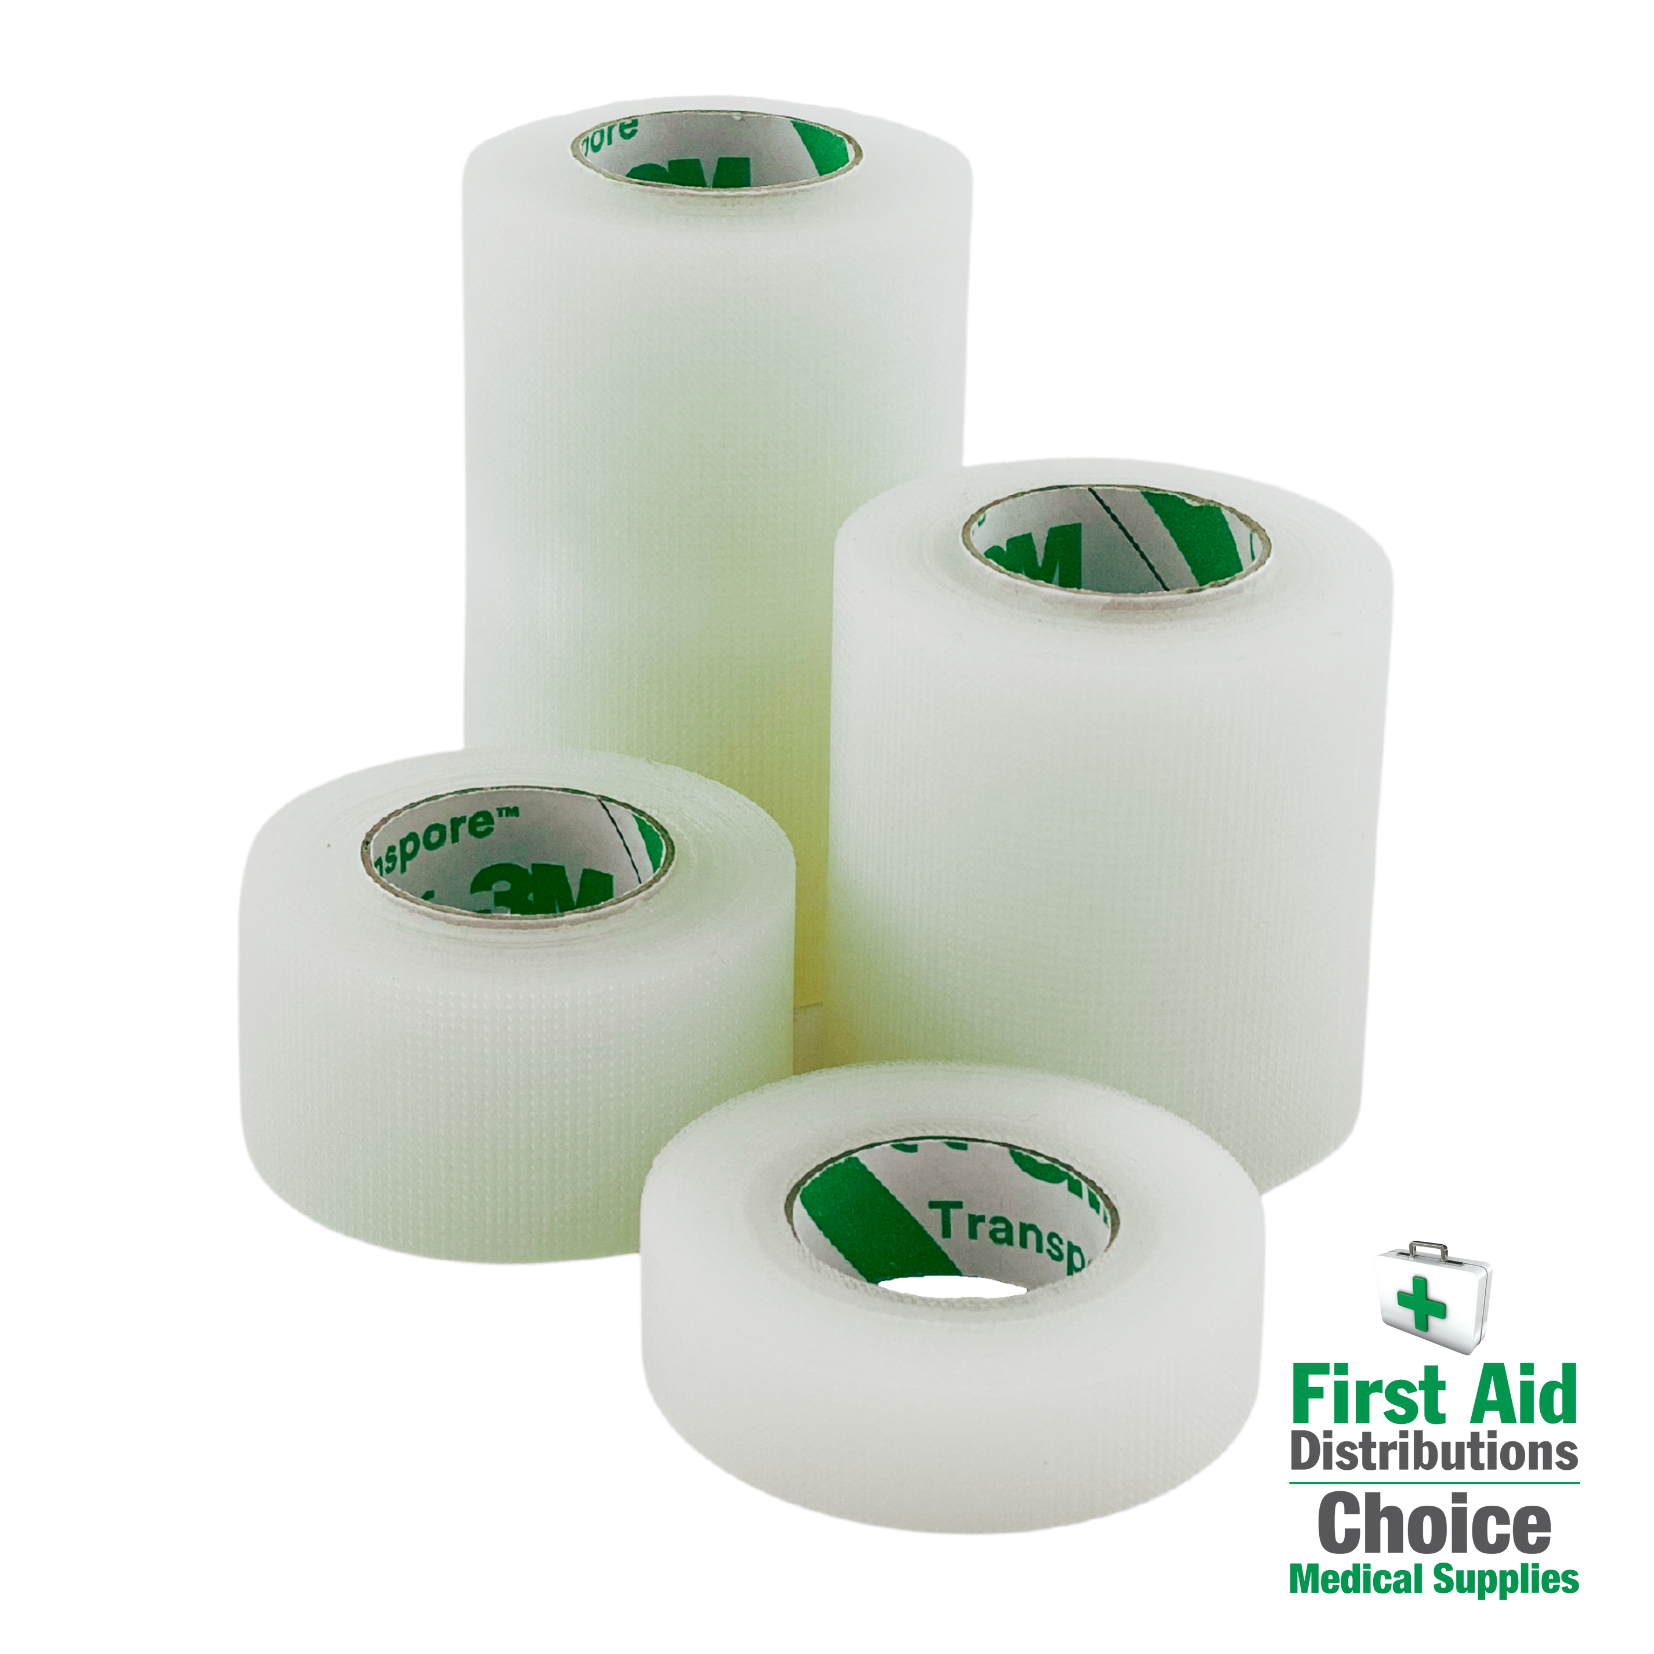 collections/3M_Transpore_Tape_All_First_Aid_Distributions_1.png